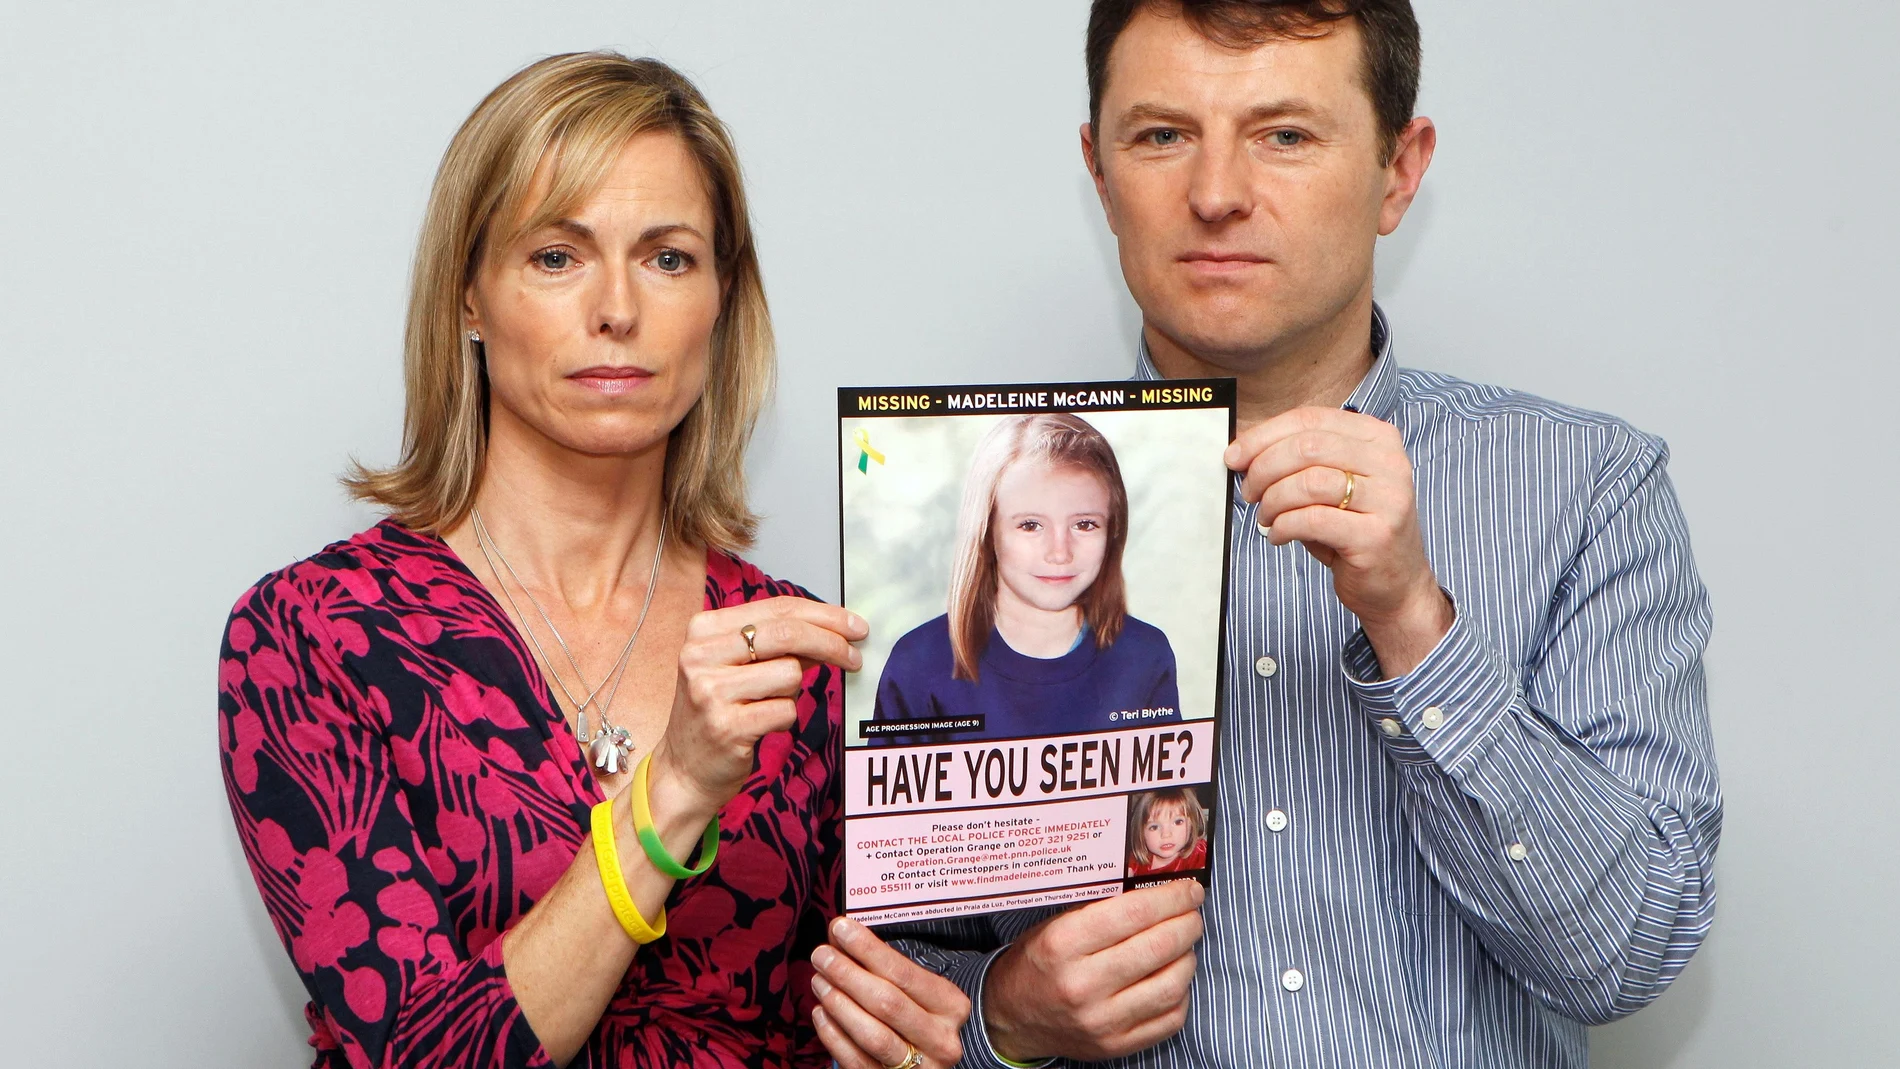 FILE PHOTO: Kate and Gerry McCann pose with a computer generated image of how their missing daughter Madeleine might look now, during a news conference in London